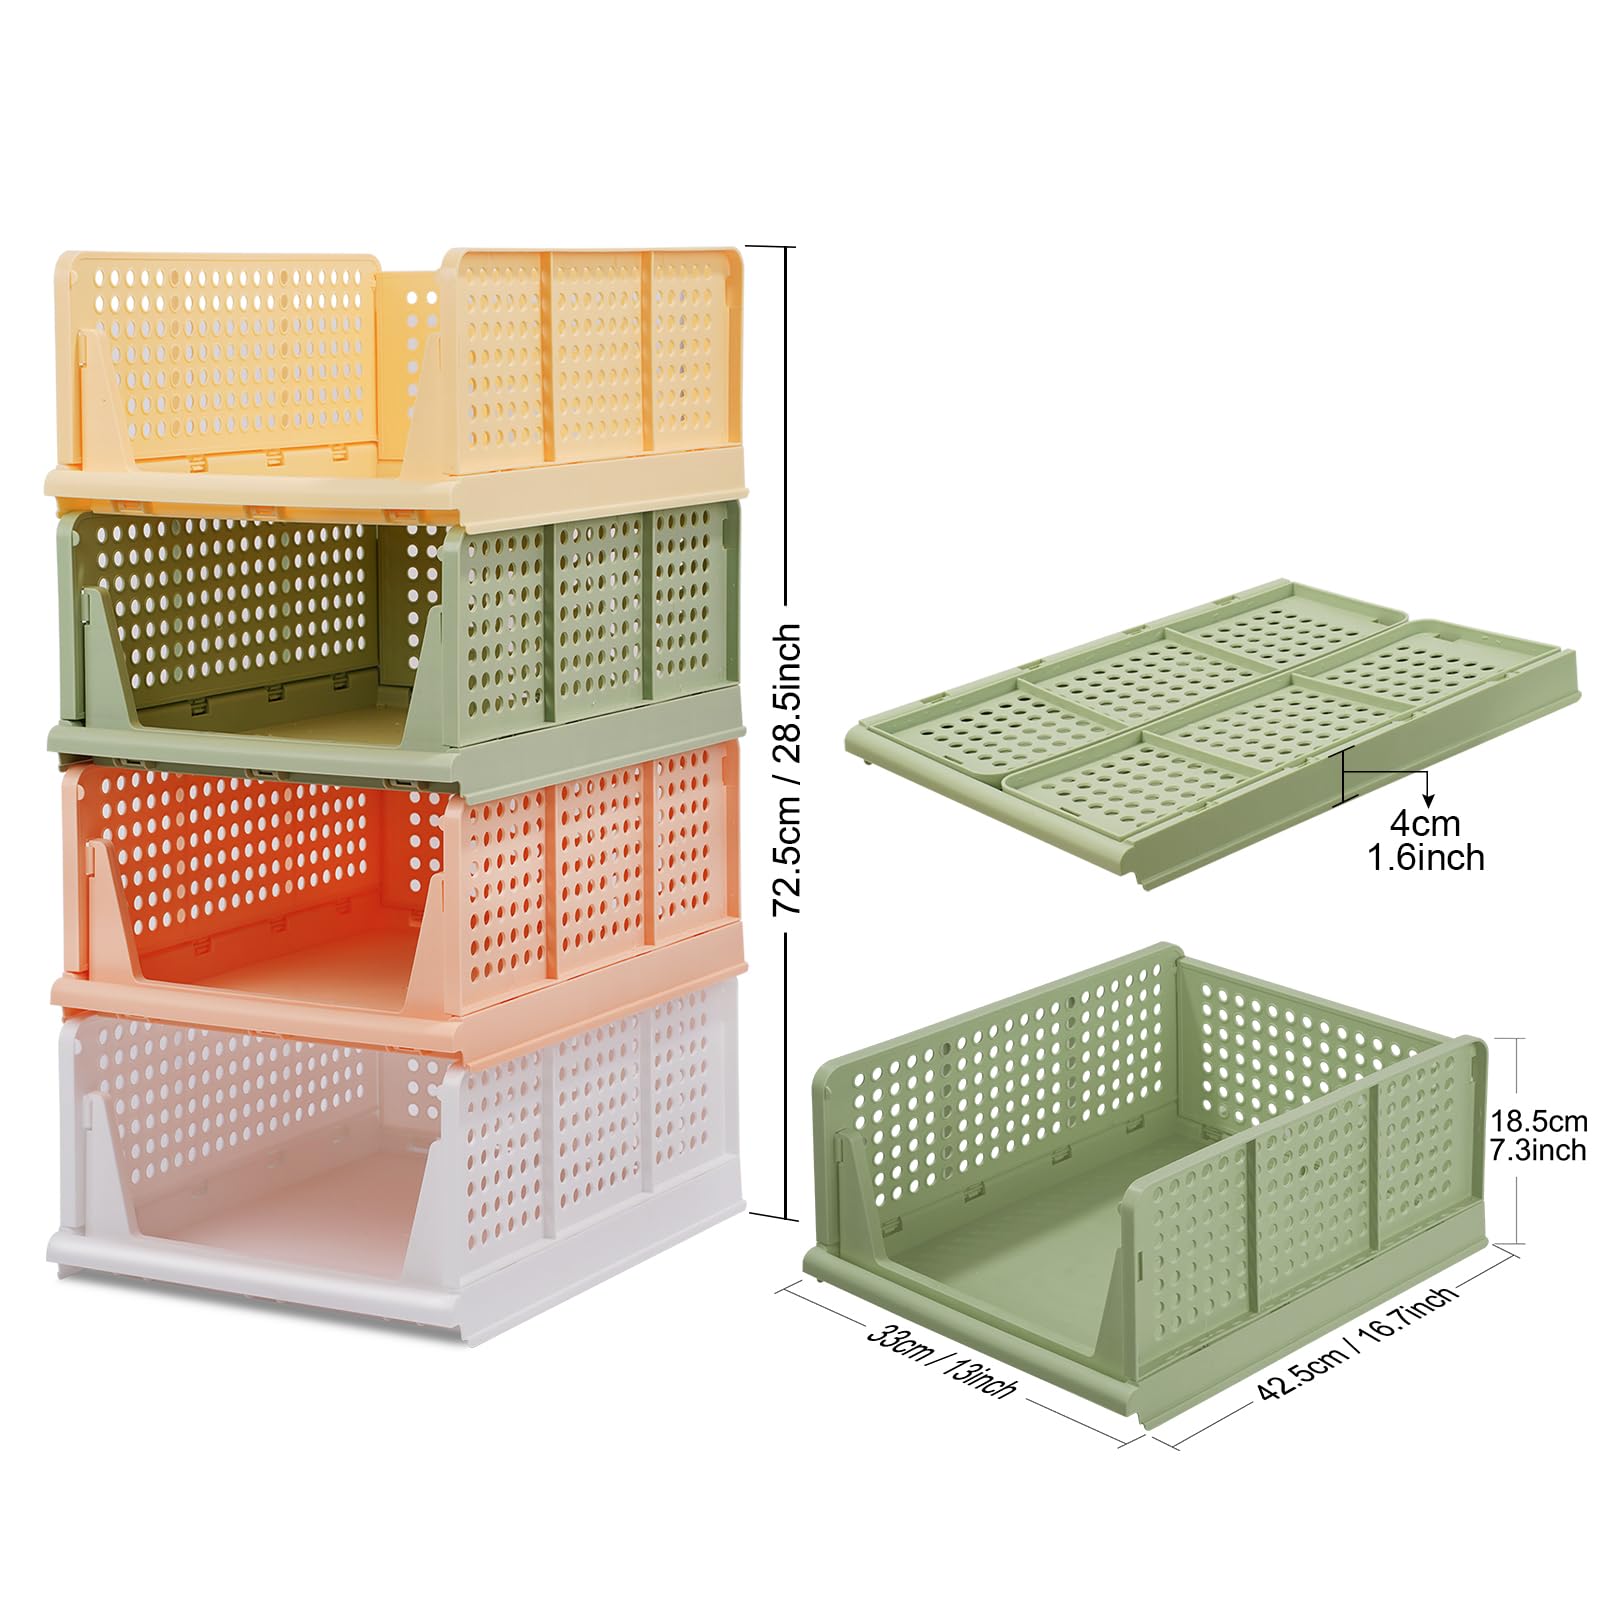 4-Pack Folding Wardrobe Storage Box Plastic Drawer Organizer Stackable Shelf Baskets Cloth Closet Container Bin Cube Home Office Bedroom Laundry Drawer Dividers for Clothes Toy Organization (Colorful)